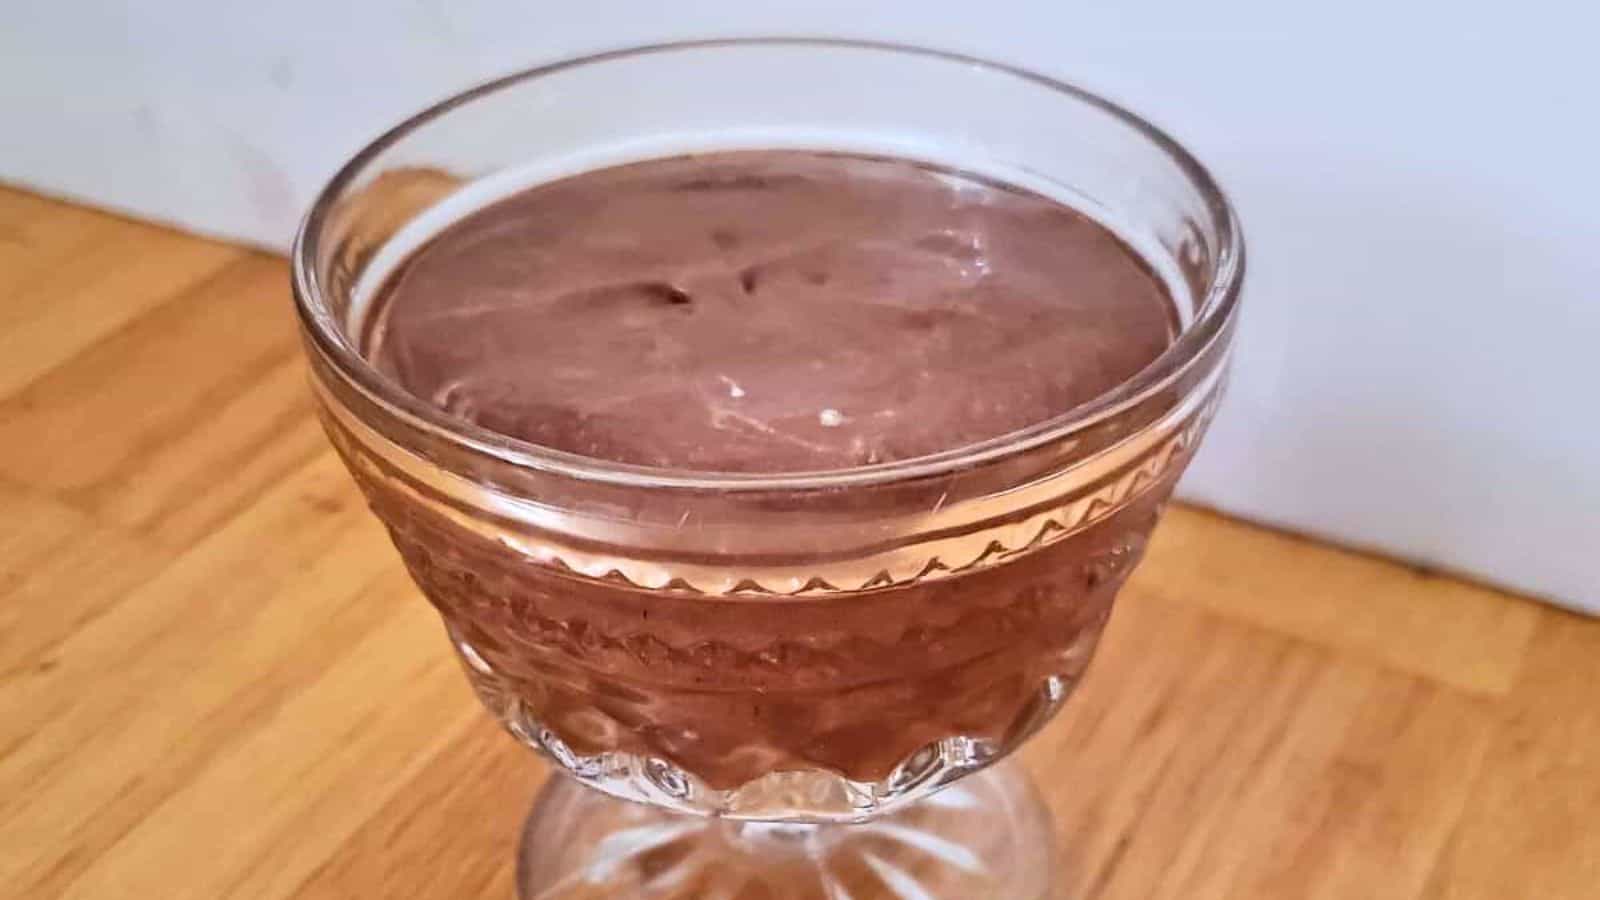 Image shows A glass of bourbon chocolate mousse sitting on a wooden table.